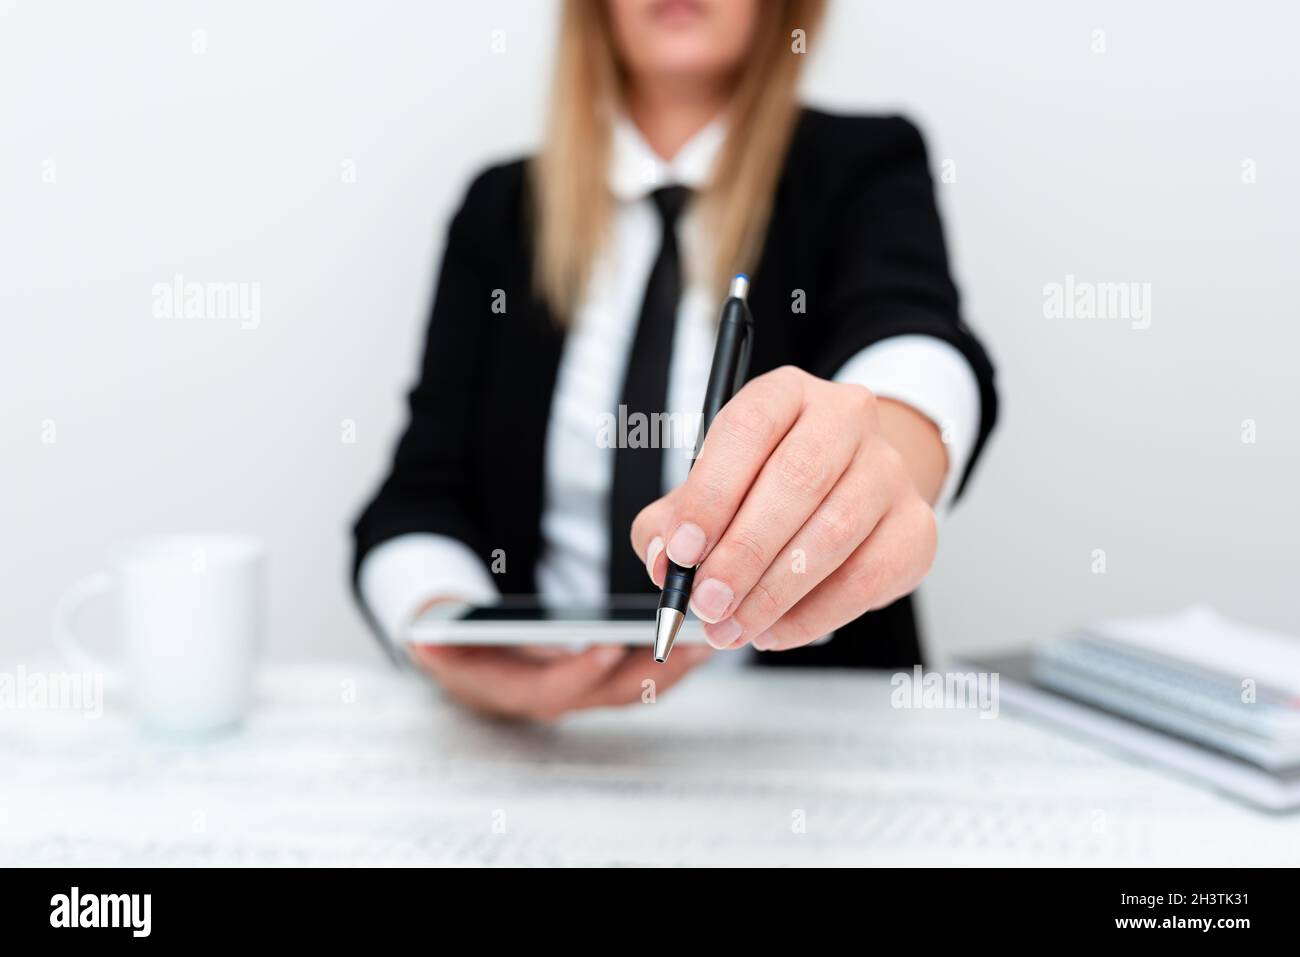 Presenting Corporate Business Data, Discussing Company Problems, Abstract Evaluating Employee Procedure, Computer Presentation I Stock Photo